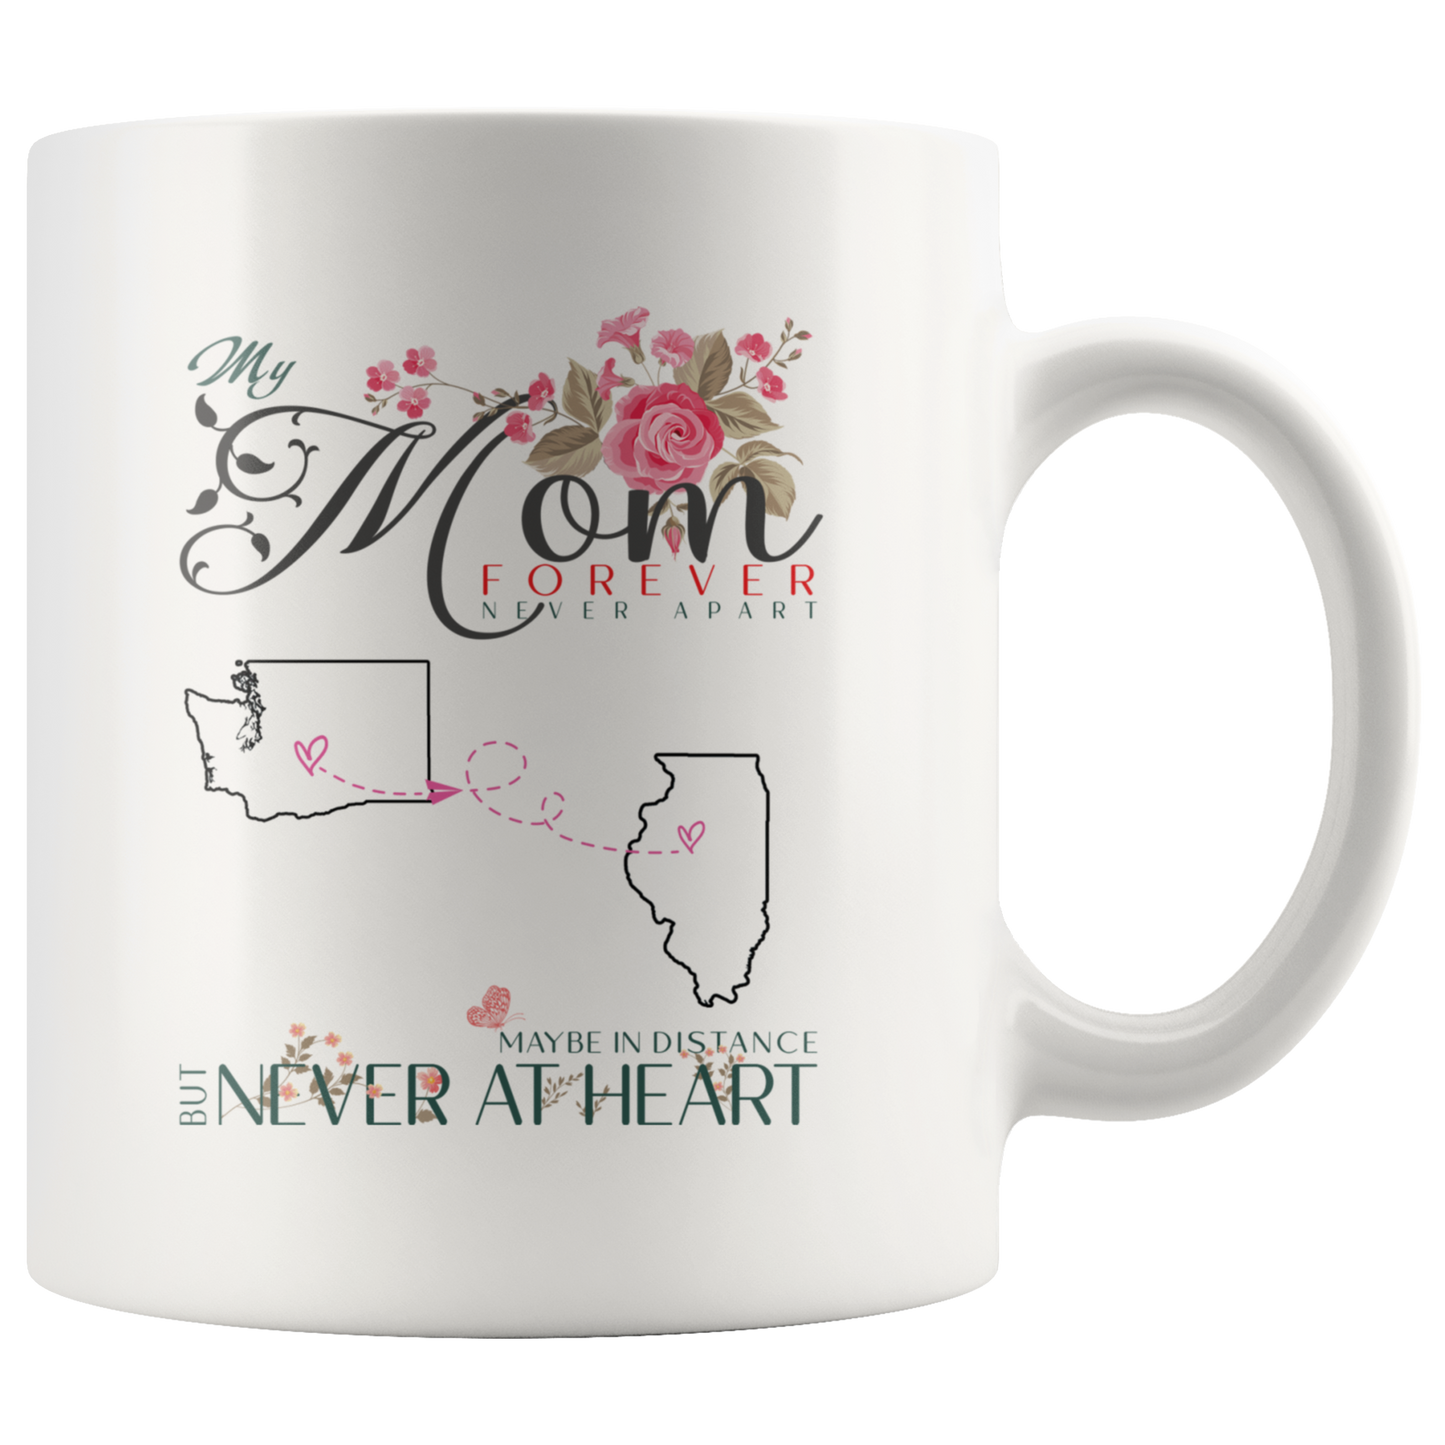 M-20321571-sp-23673 - [ Washington | Illinois ]Personalized Mothers Day Coffee Mug - My Mom Forever Never A